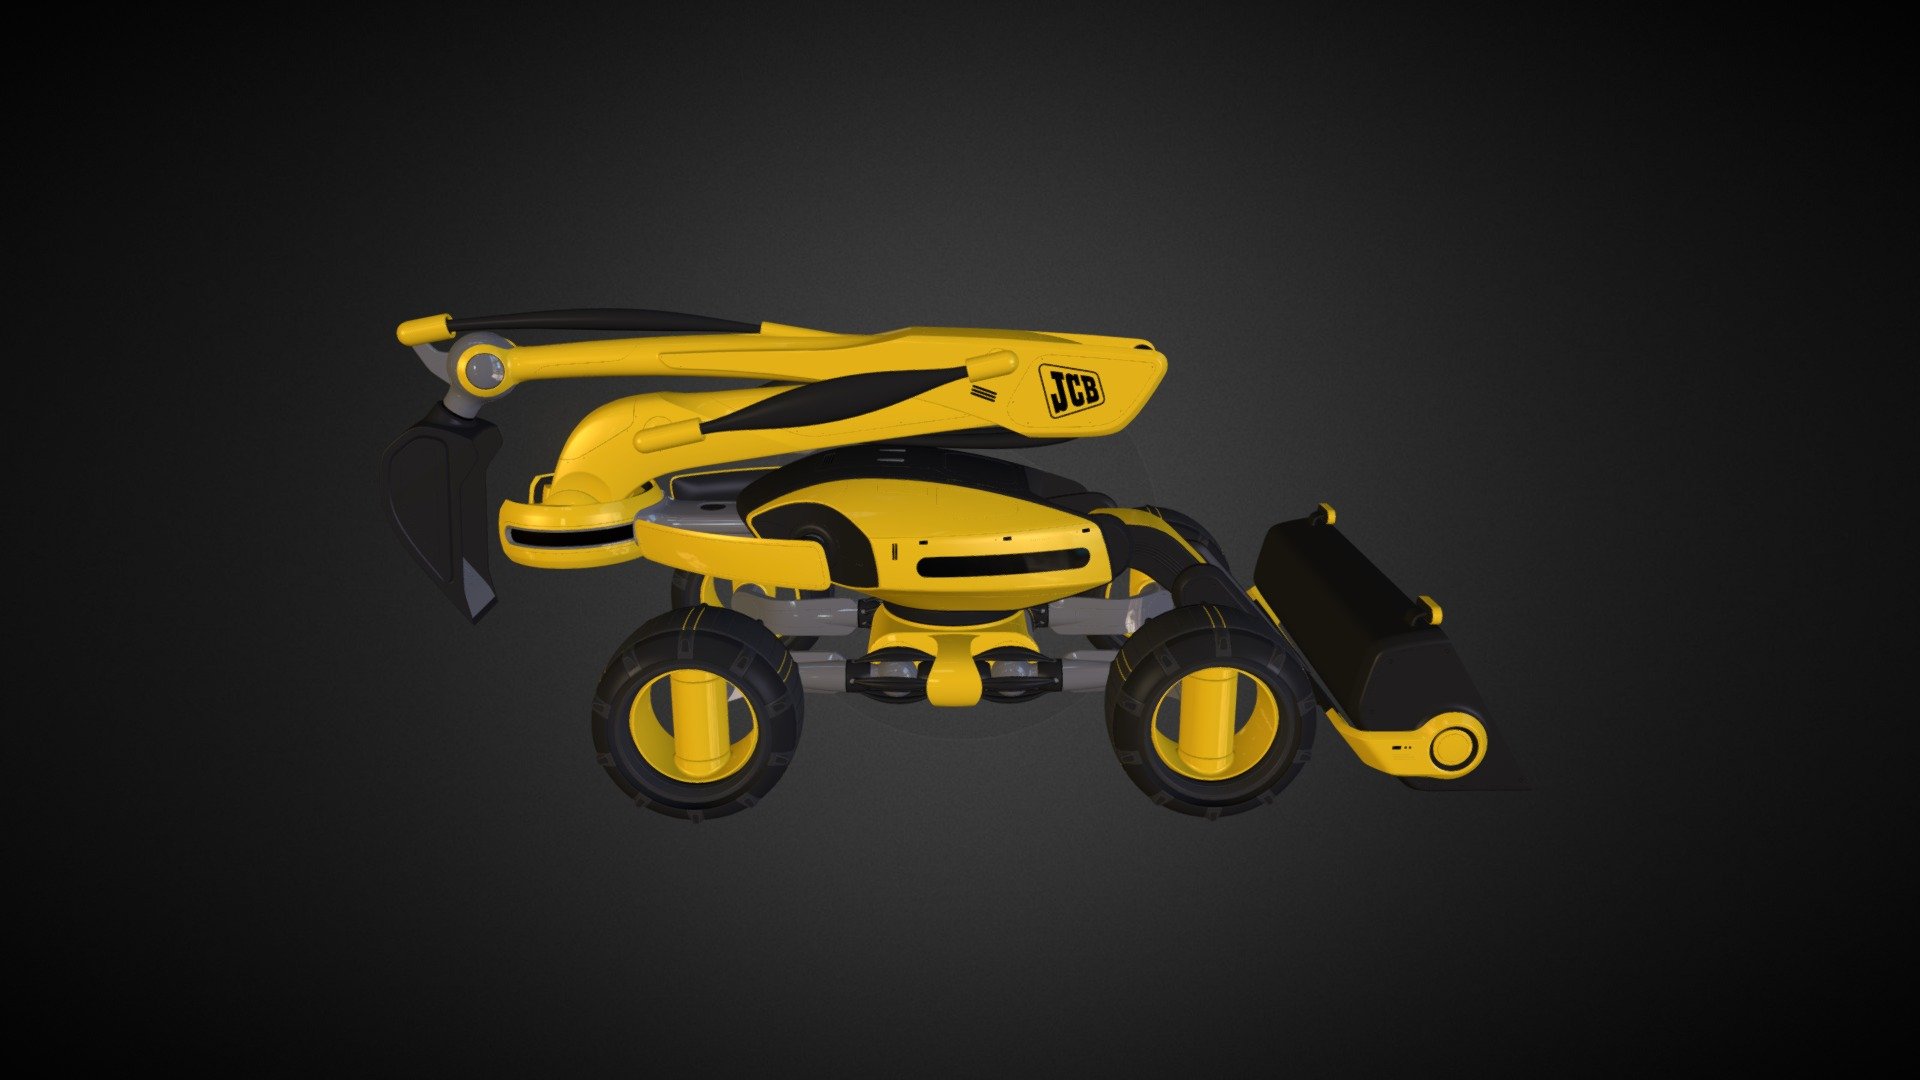 A great project I undertook as an entrant for the JCB project 120 design compeition. The brief was to redesign the iconic backhoe loader for the year 2073, for which my design was awarded 2nd place 3d model